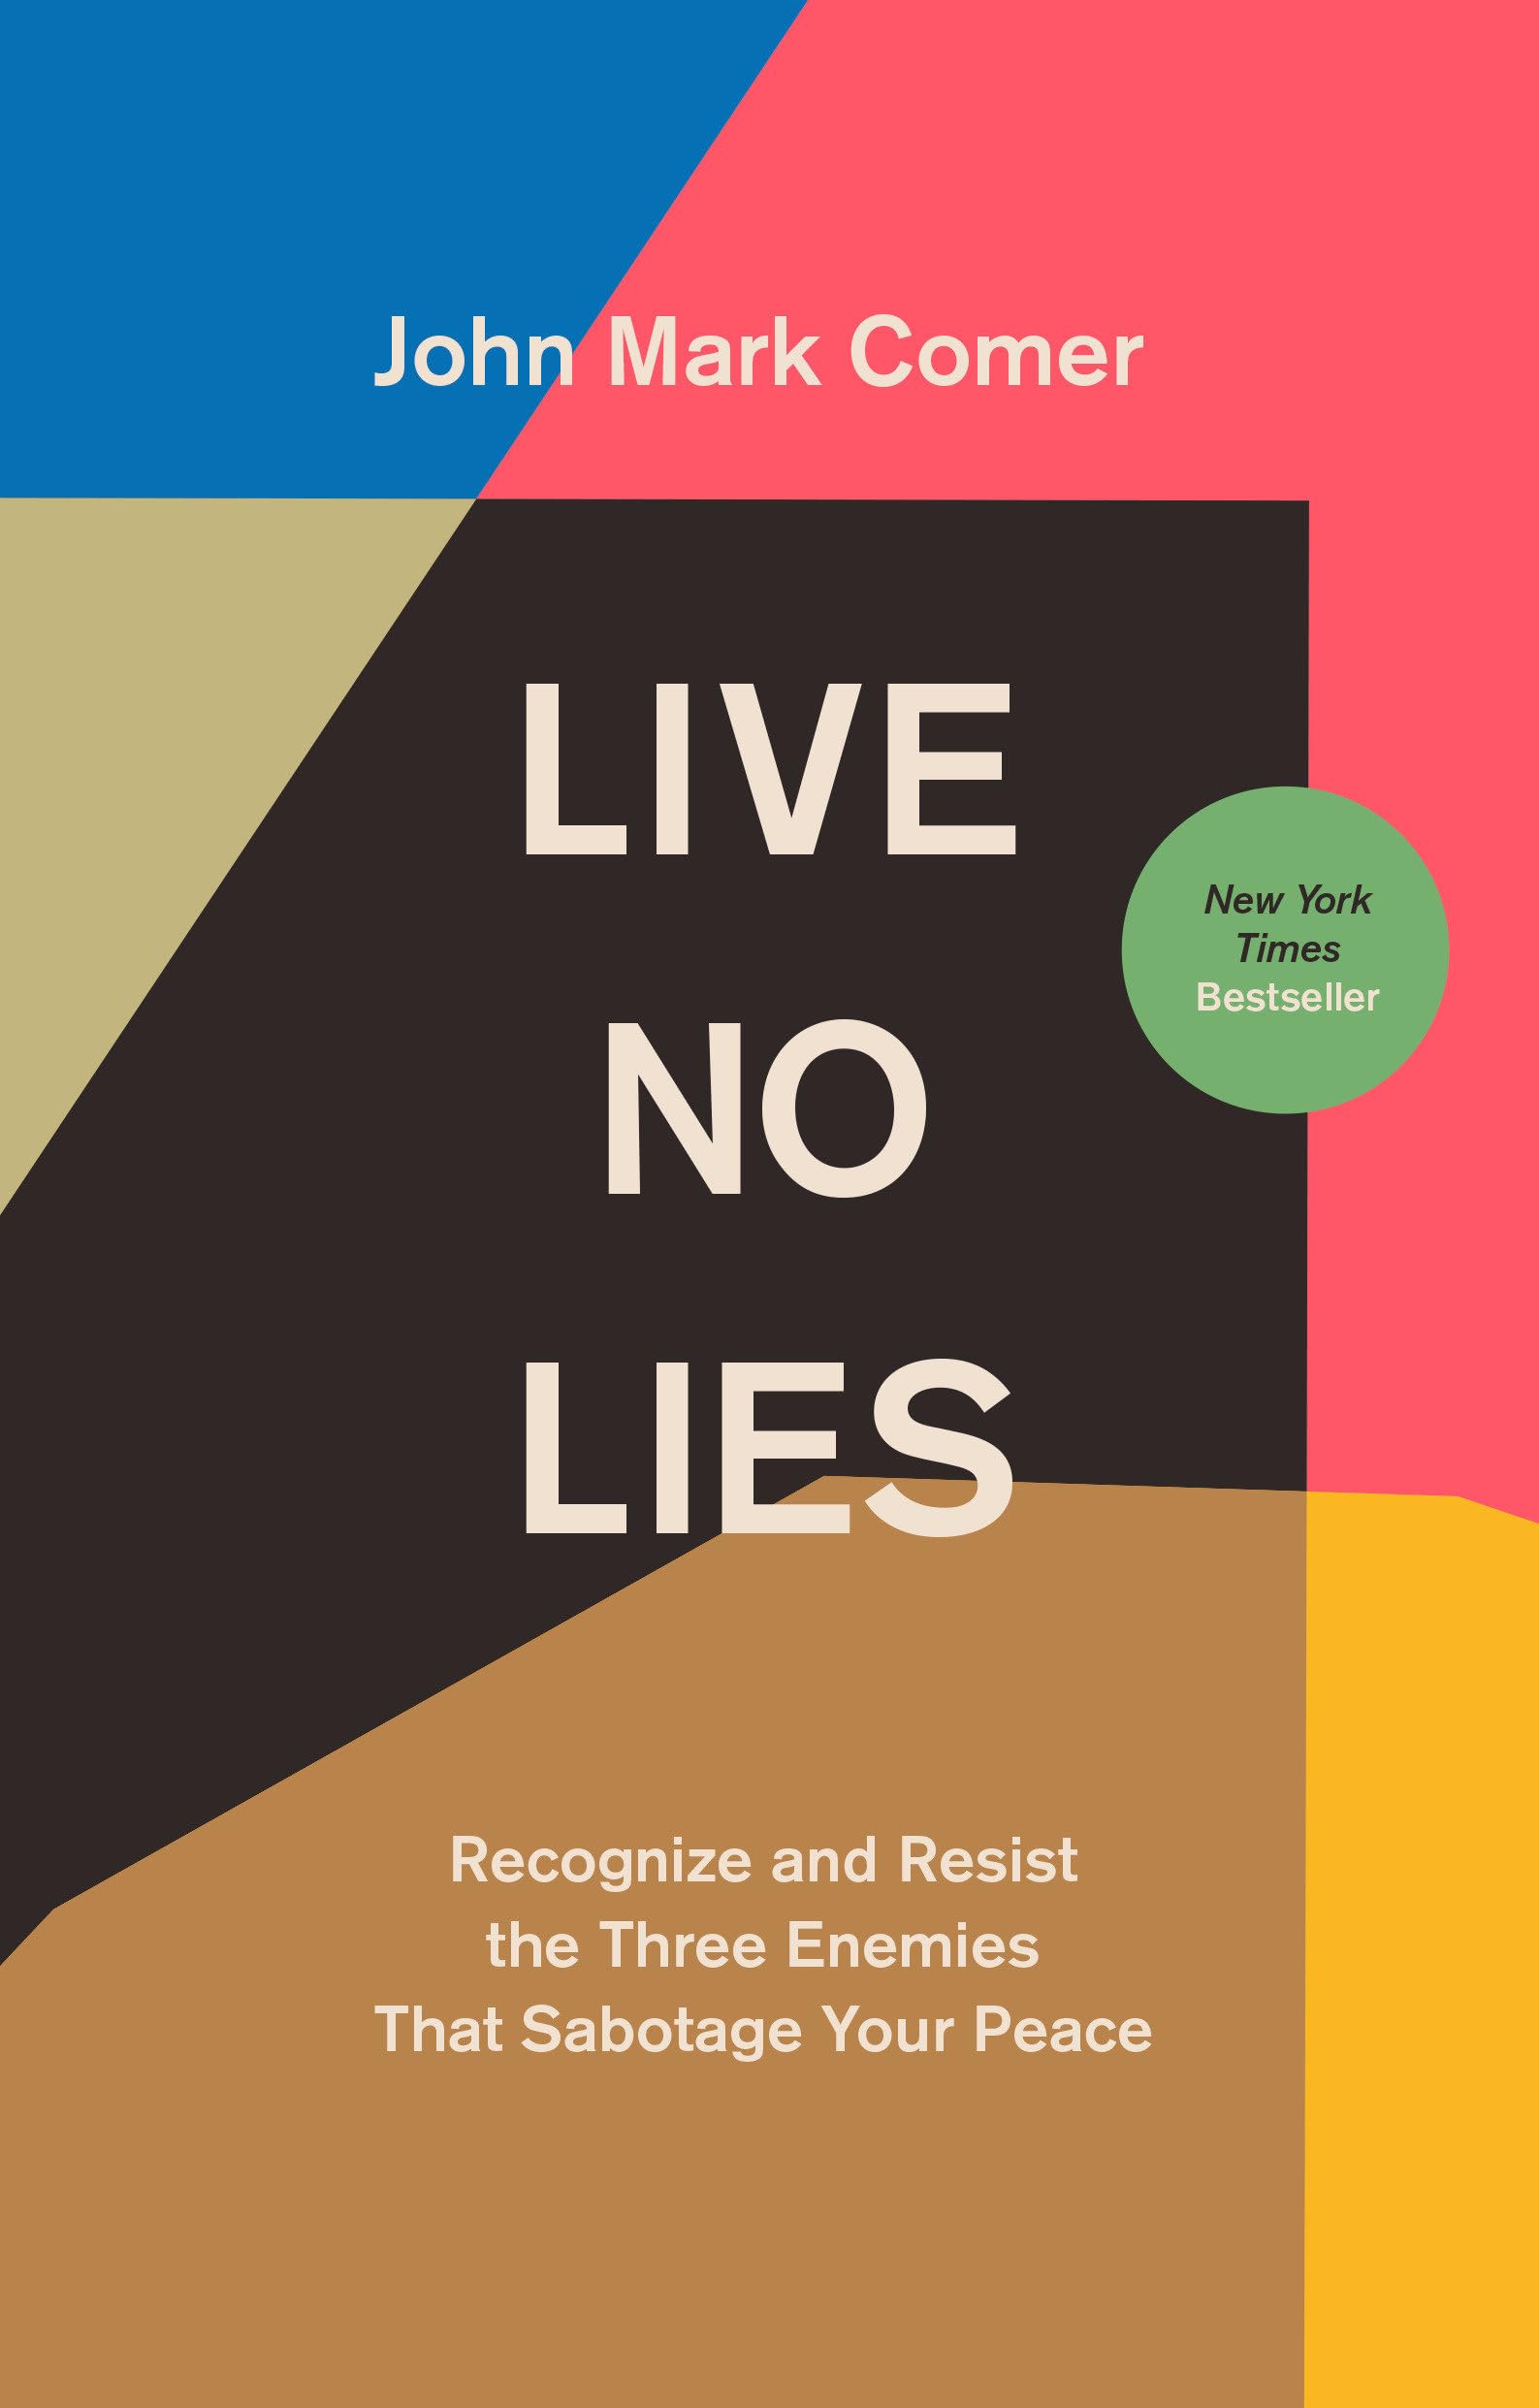 Live No Lies: Recognize and Resist the Three Enemies That Sabotage Your Peace by Comer, John Mark